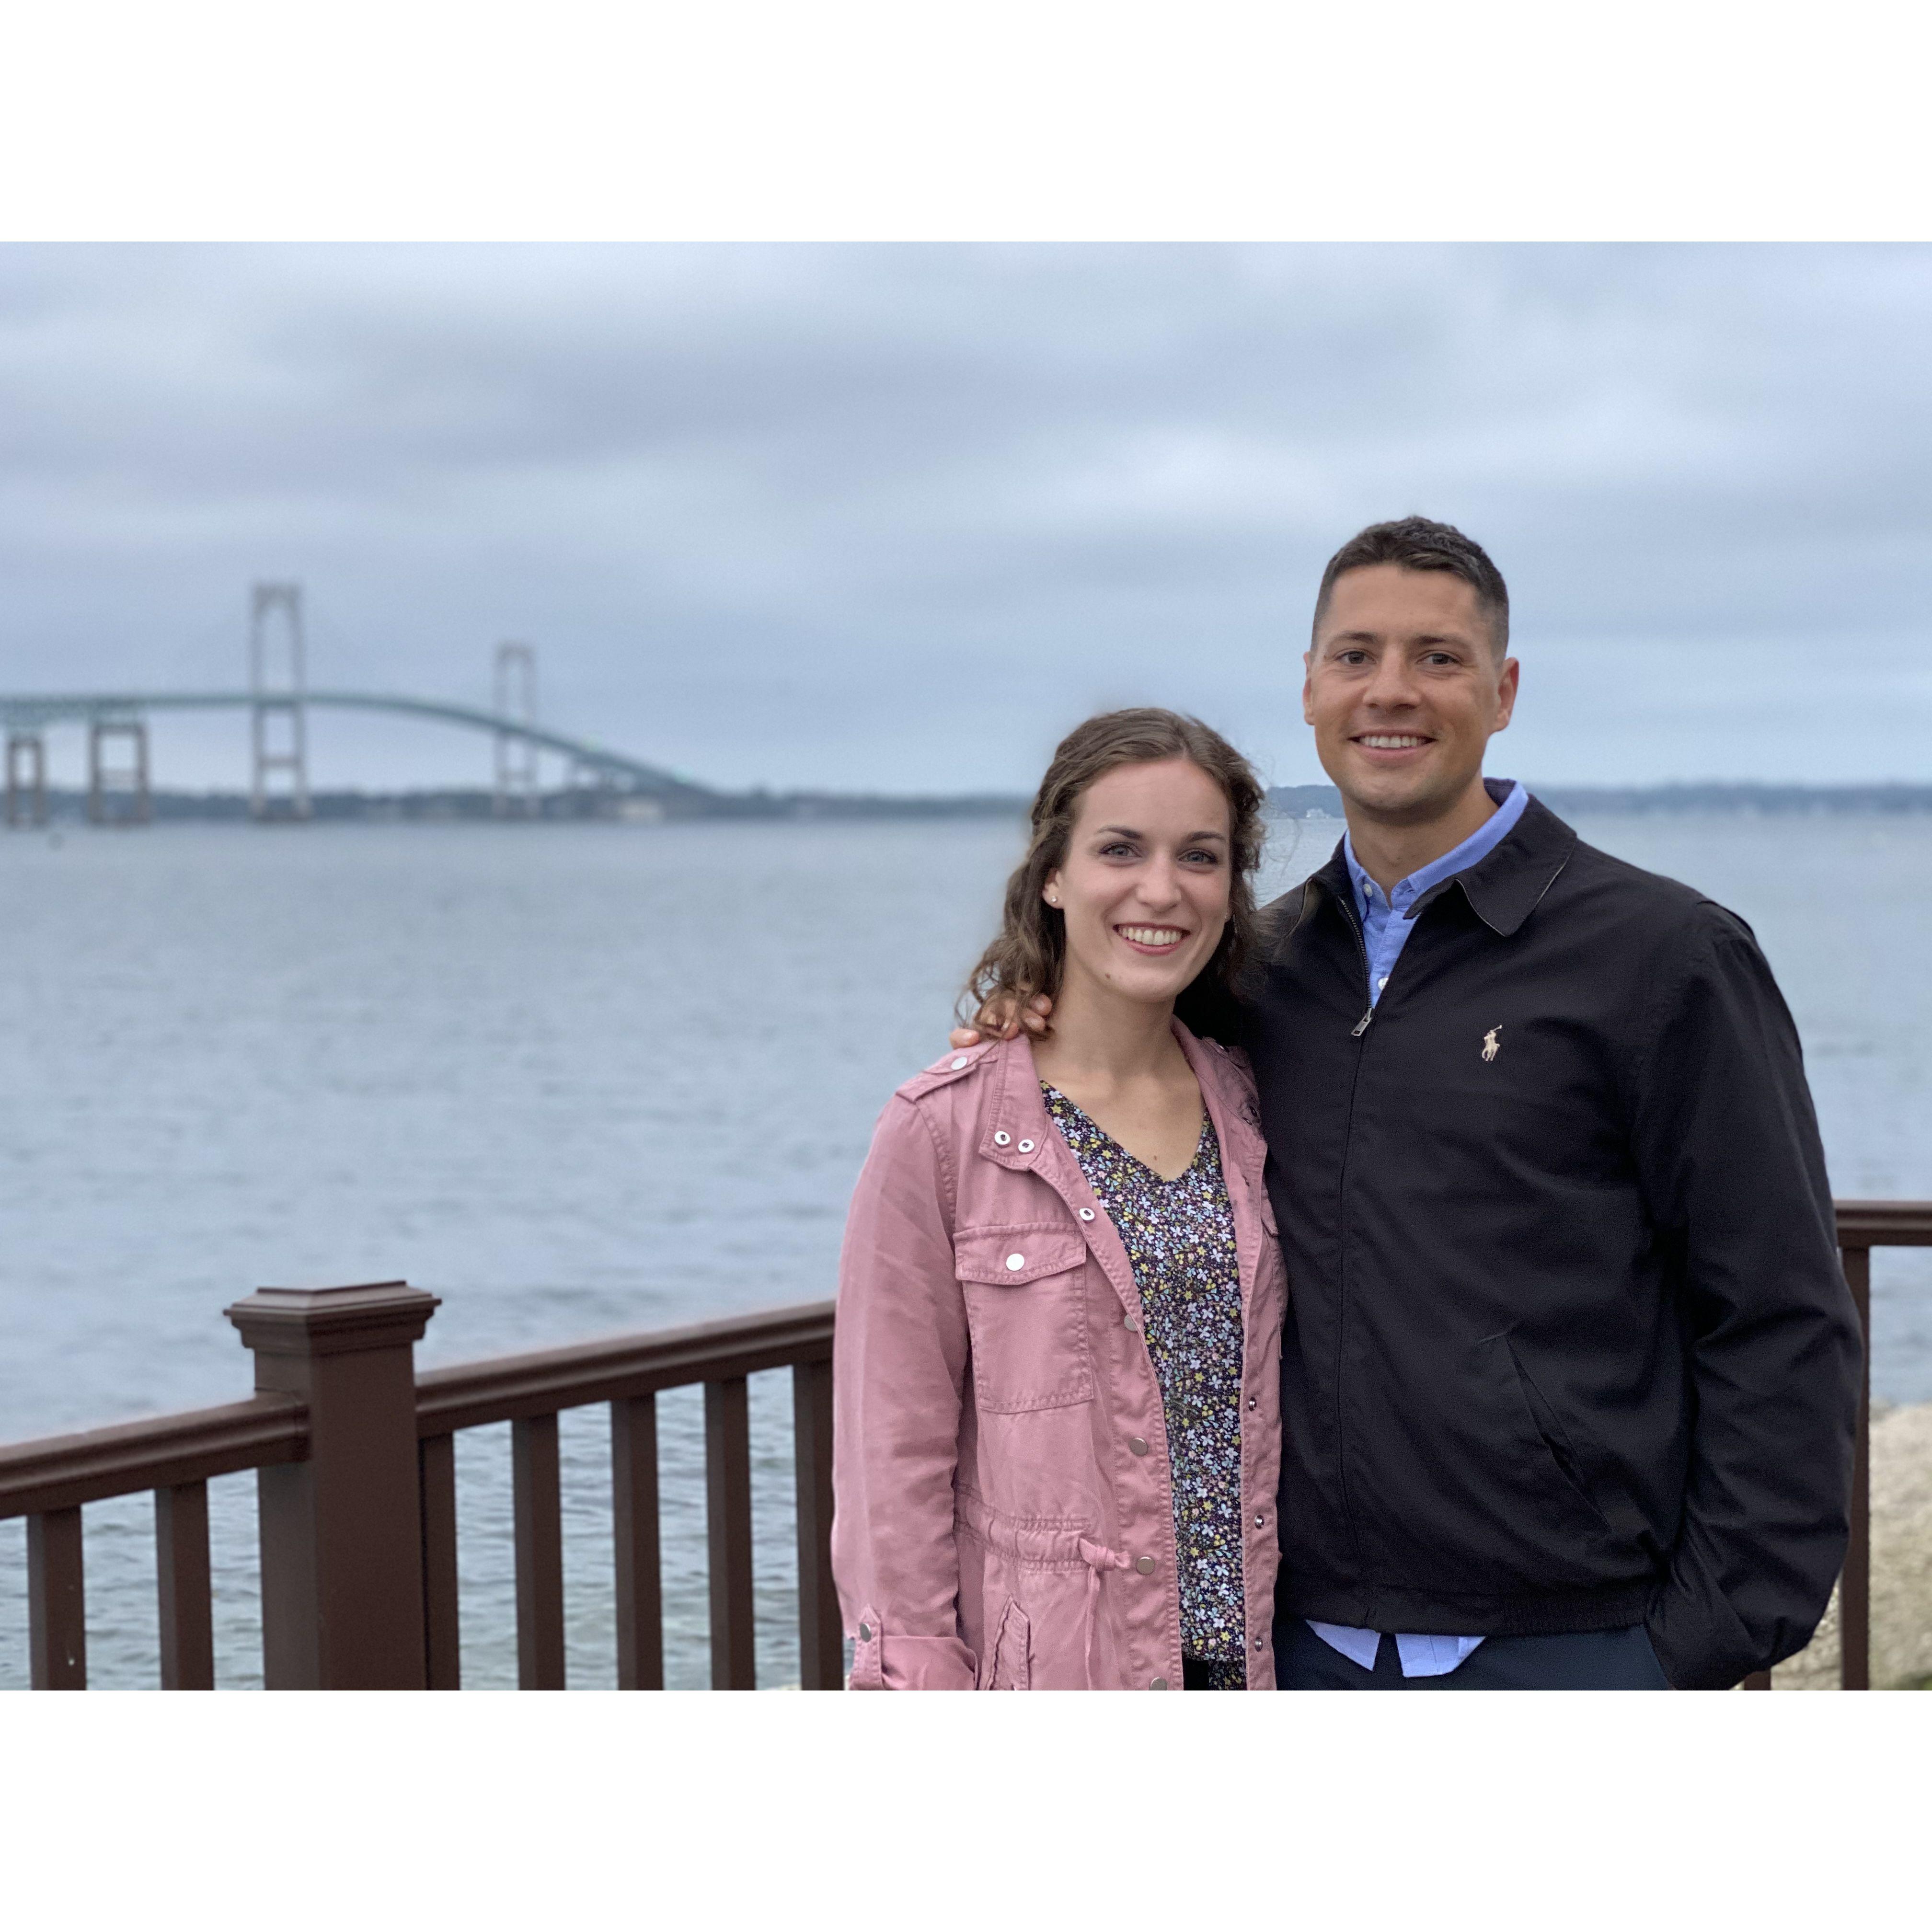 A weekend in Newport, RI as Andrew finished up his year of USMC training before being stationed in Quantico.